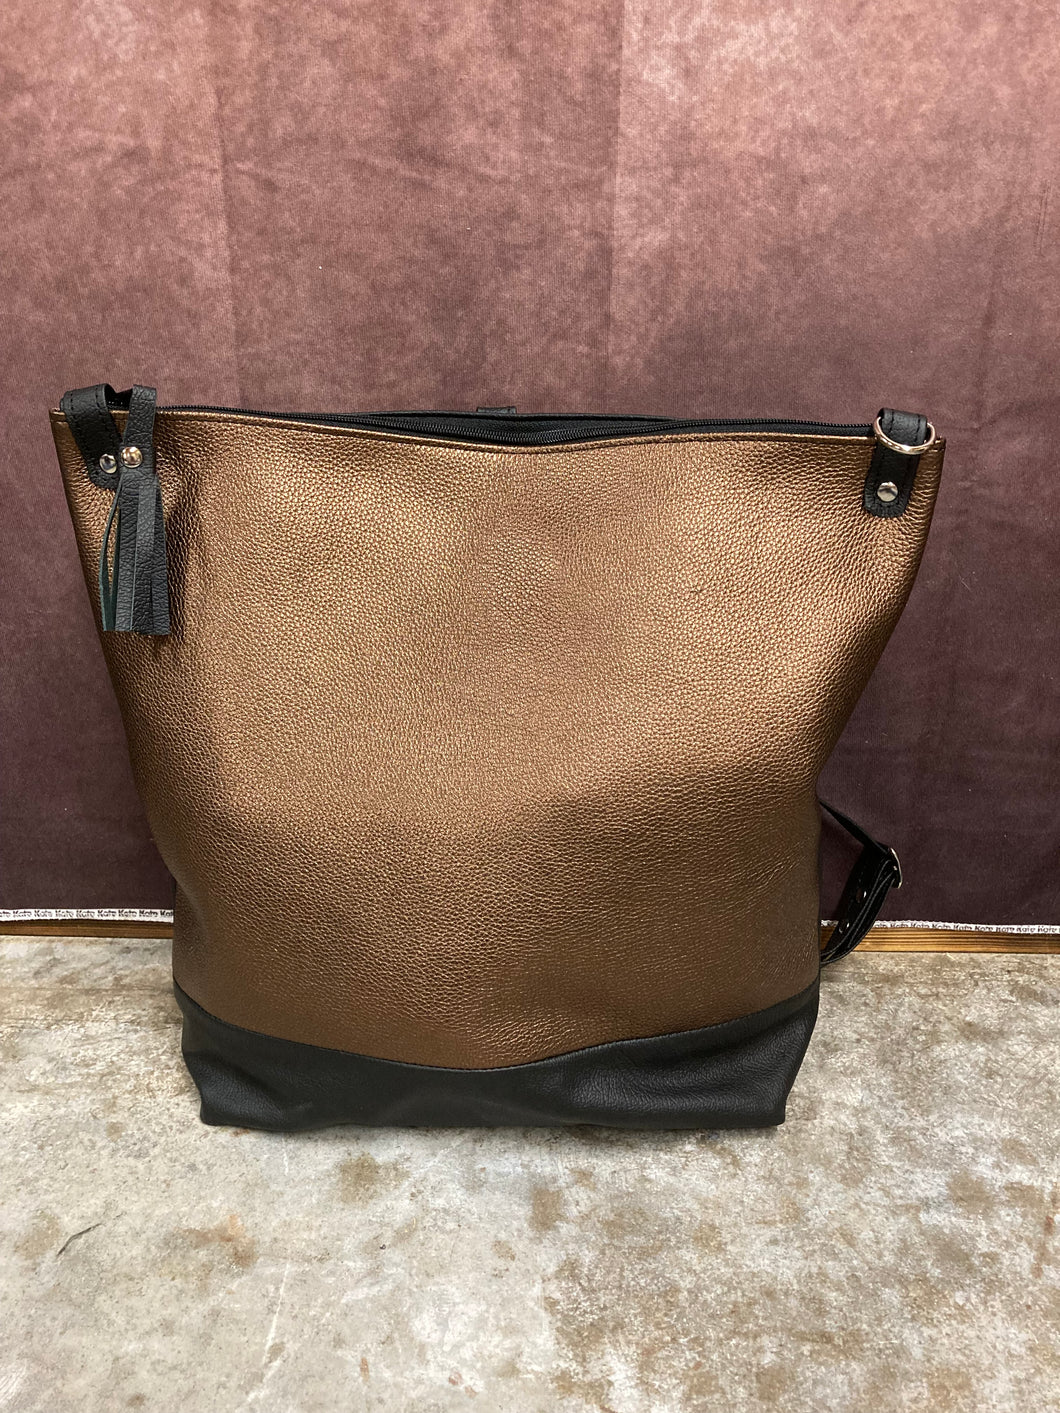 Backpack/Crossbody Bag -  Copper and Black Leather